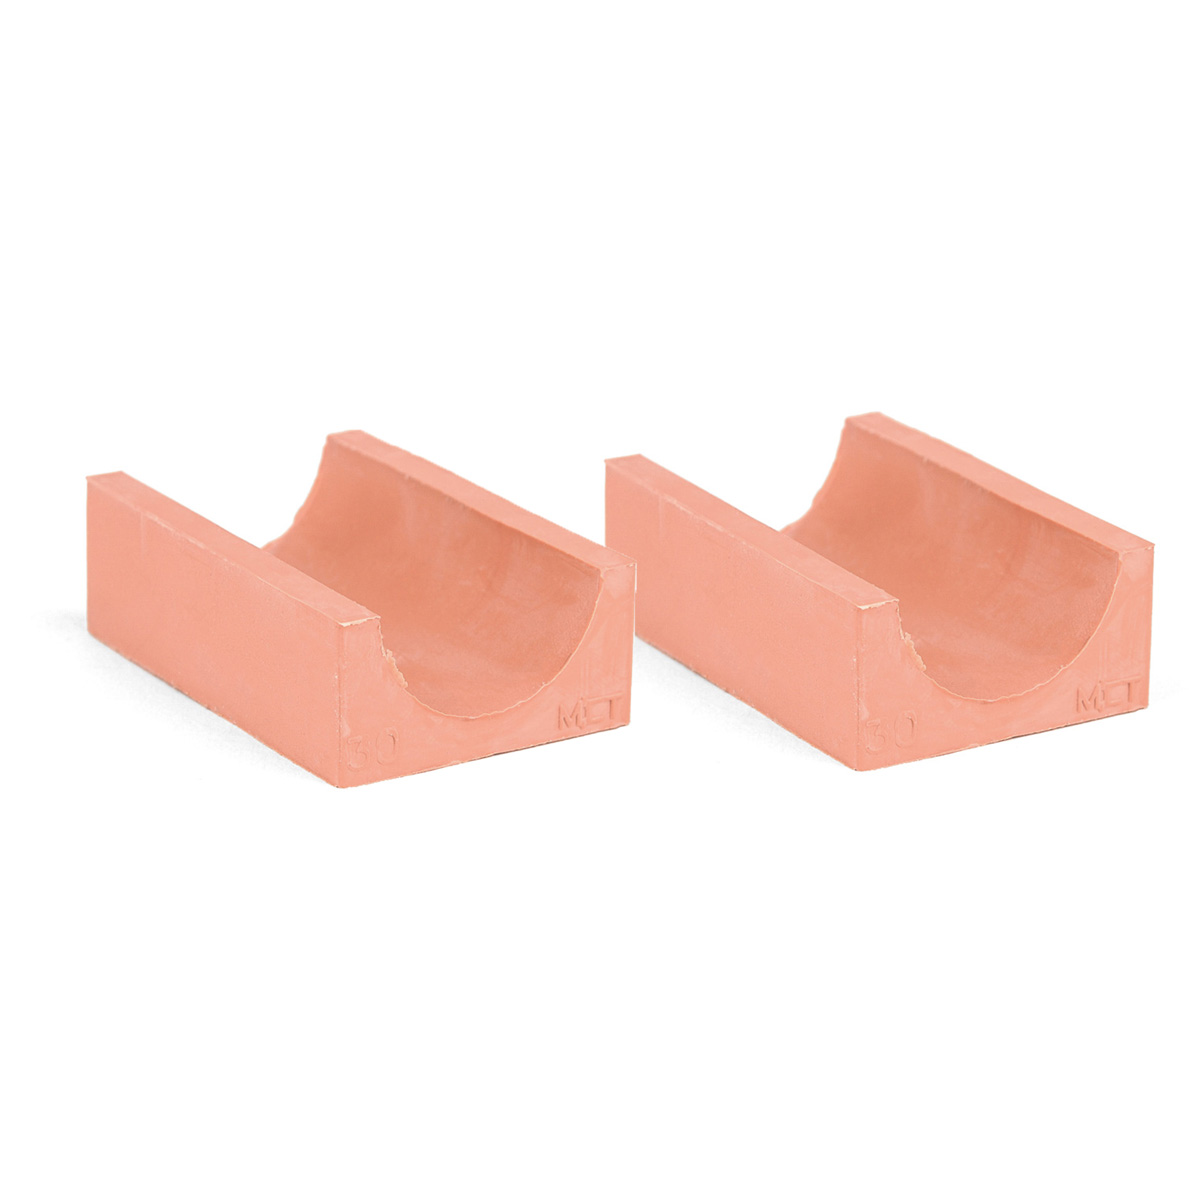 40-30*2 Set of 2 half insert block lycron, 40-30 for cable/pipe diam. 29.5-31.5mm